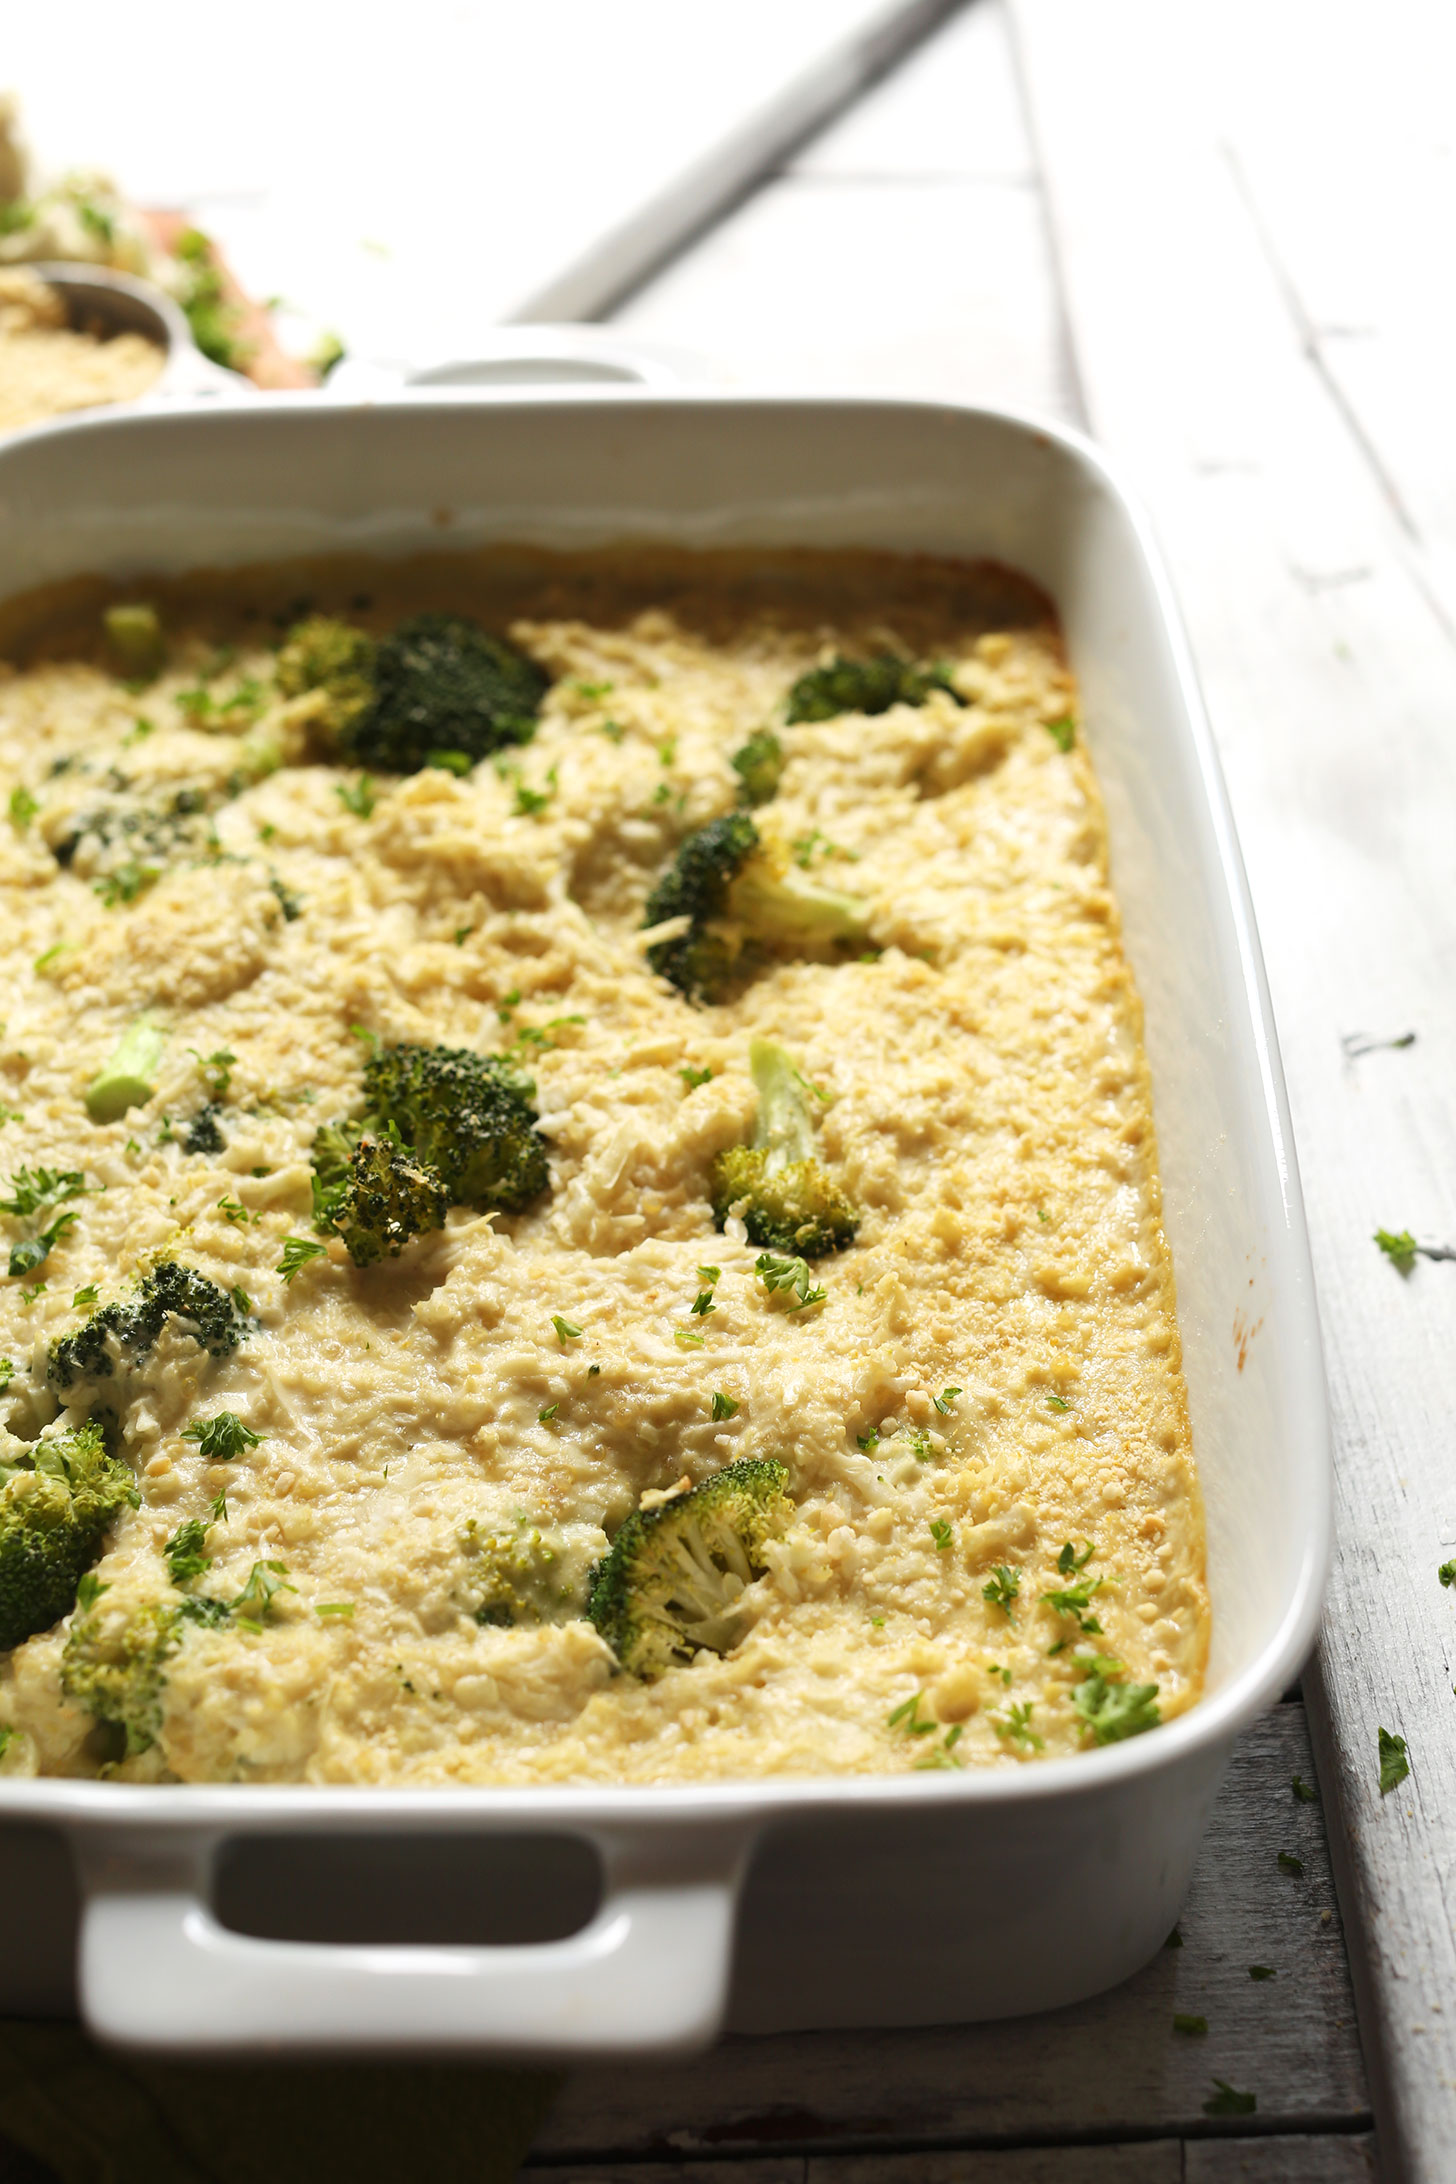 Ceramic baking dish with Cheesy Cauliflower Rice Broccoli Bake for a gluten-free plant-based side dish